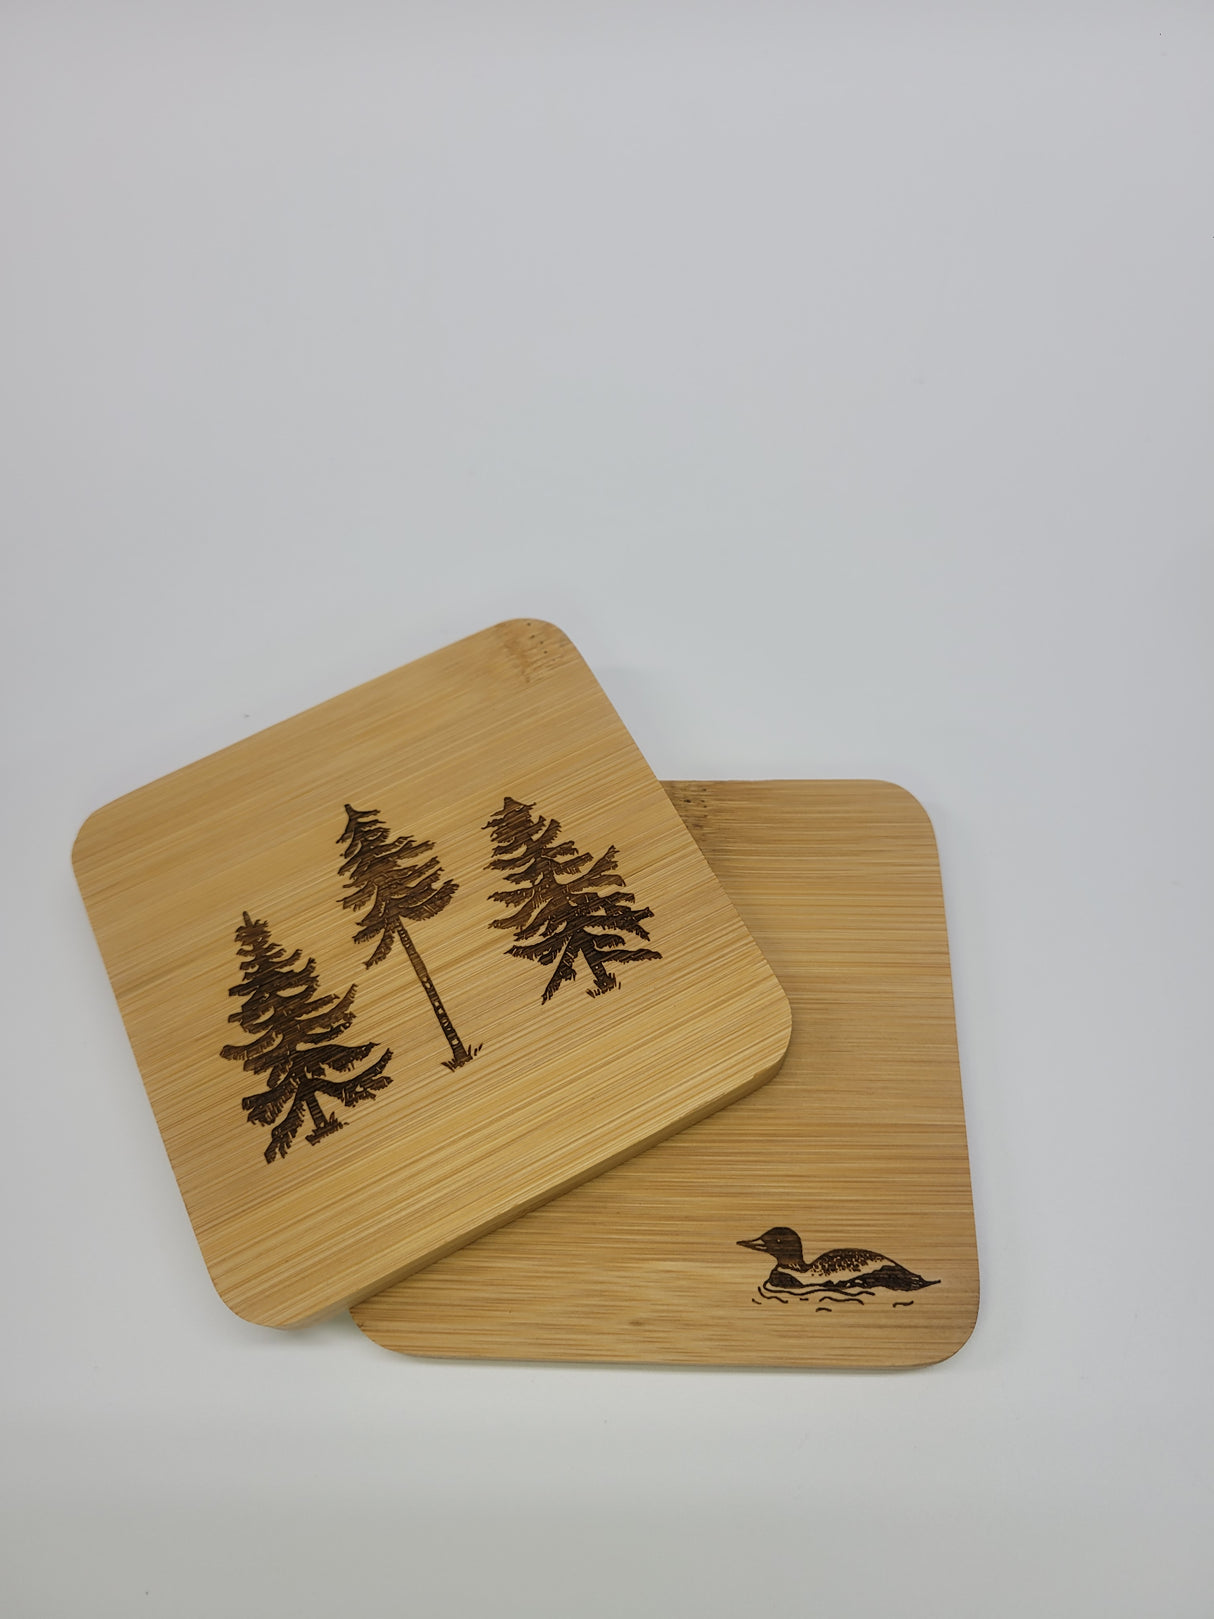 The Woods Maine: Three Pines® Loon Bamboo Coasters